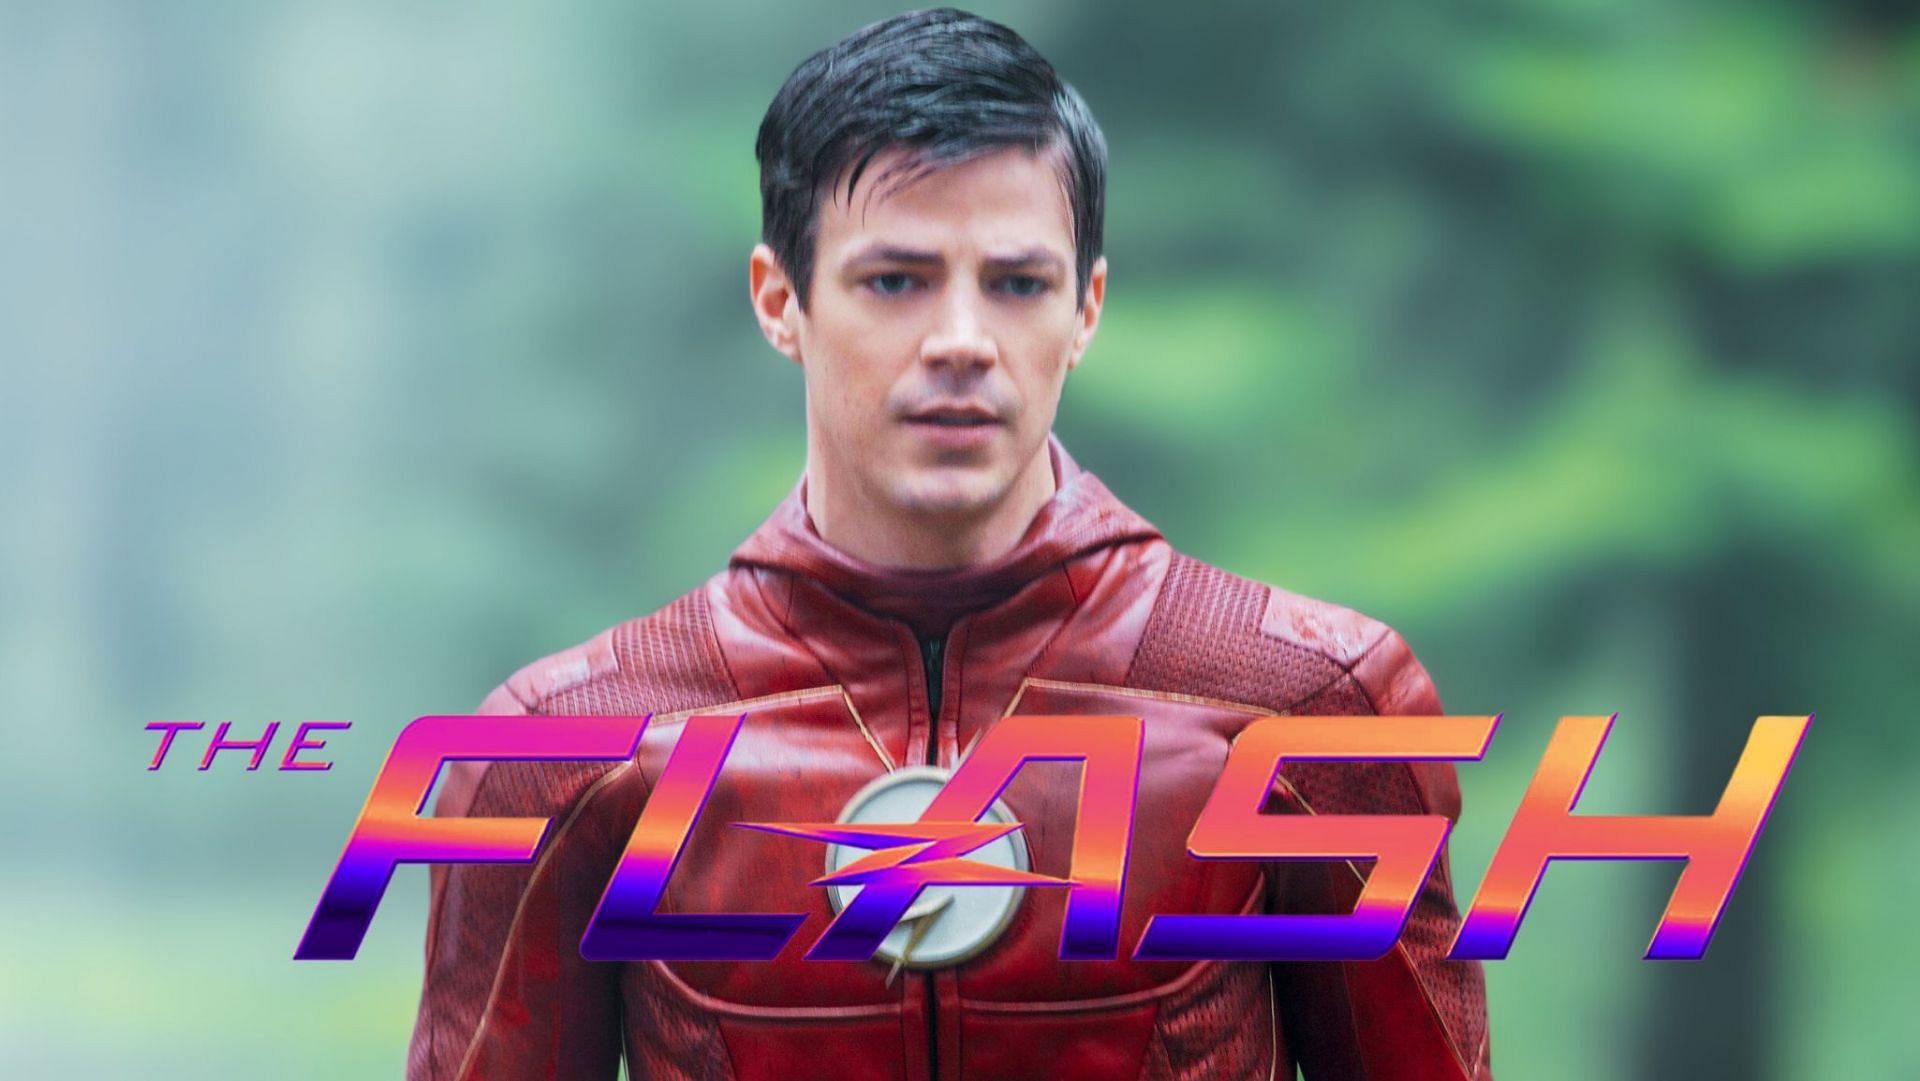 The Flash races towards its final run in The CW